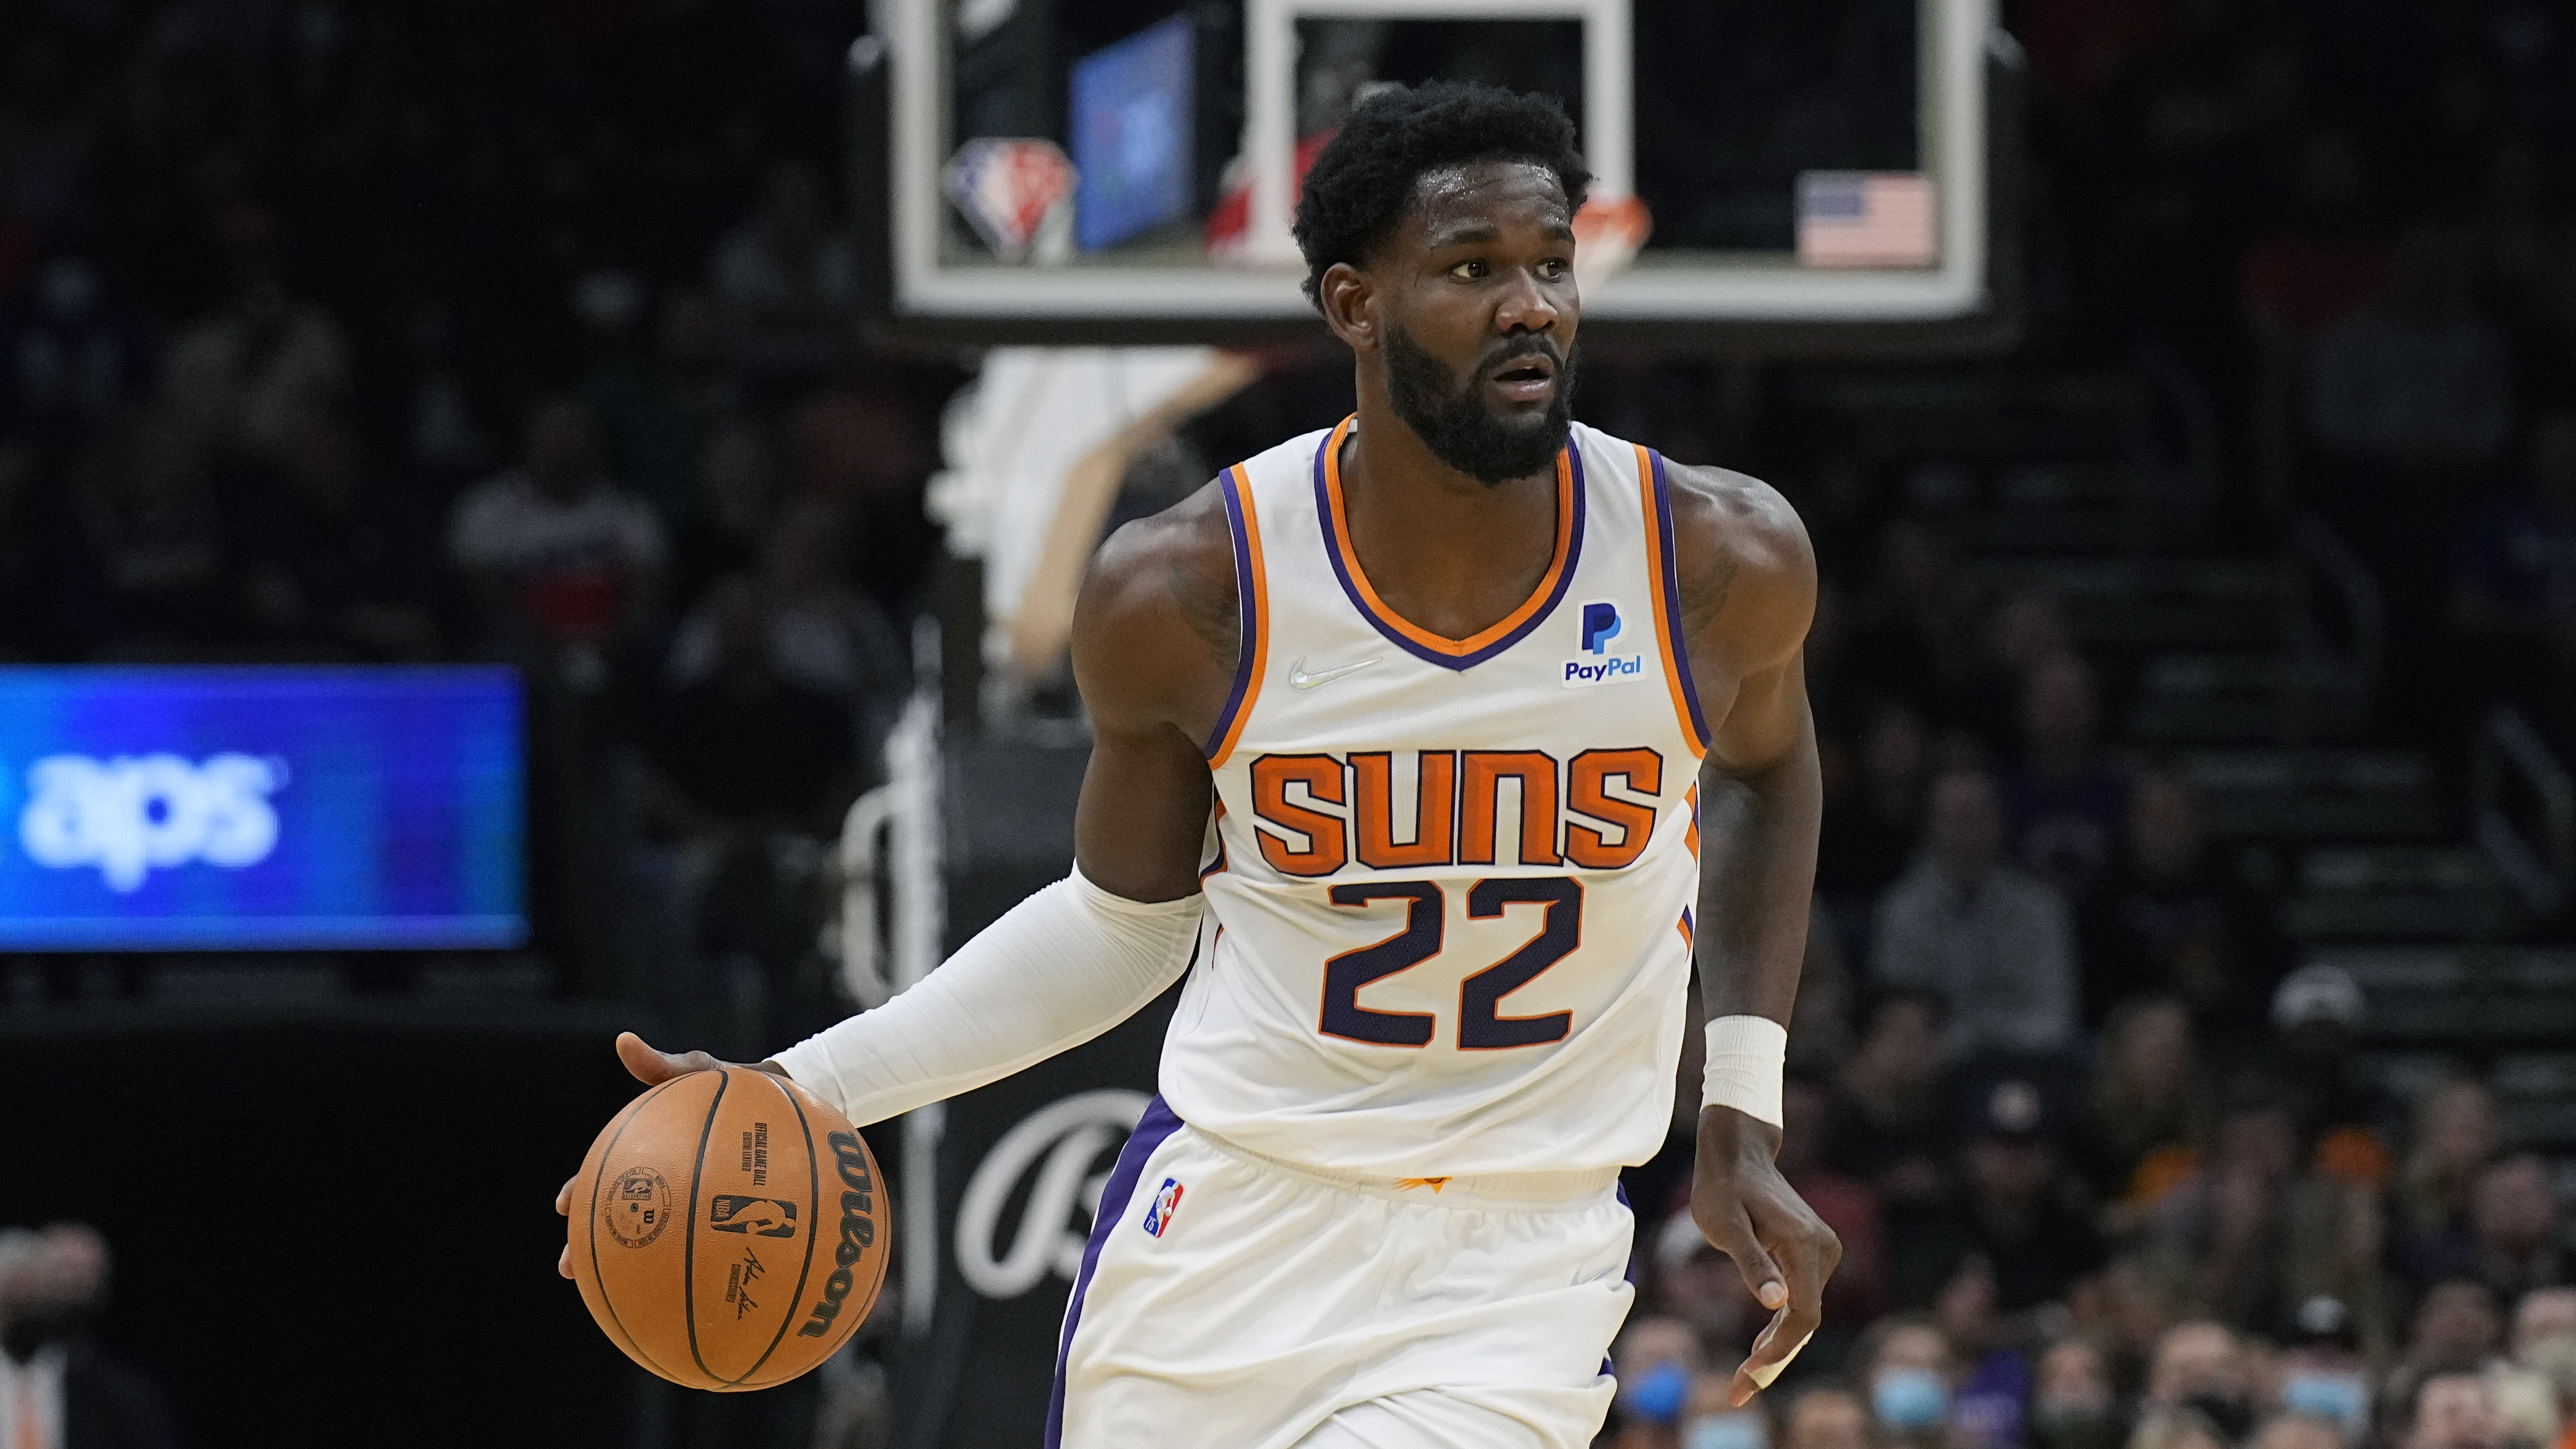 Suns officially have a Big 3 as Deandre Ayton makes history